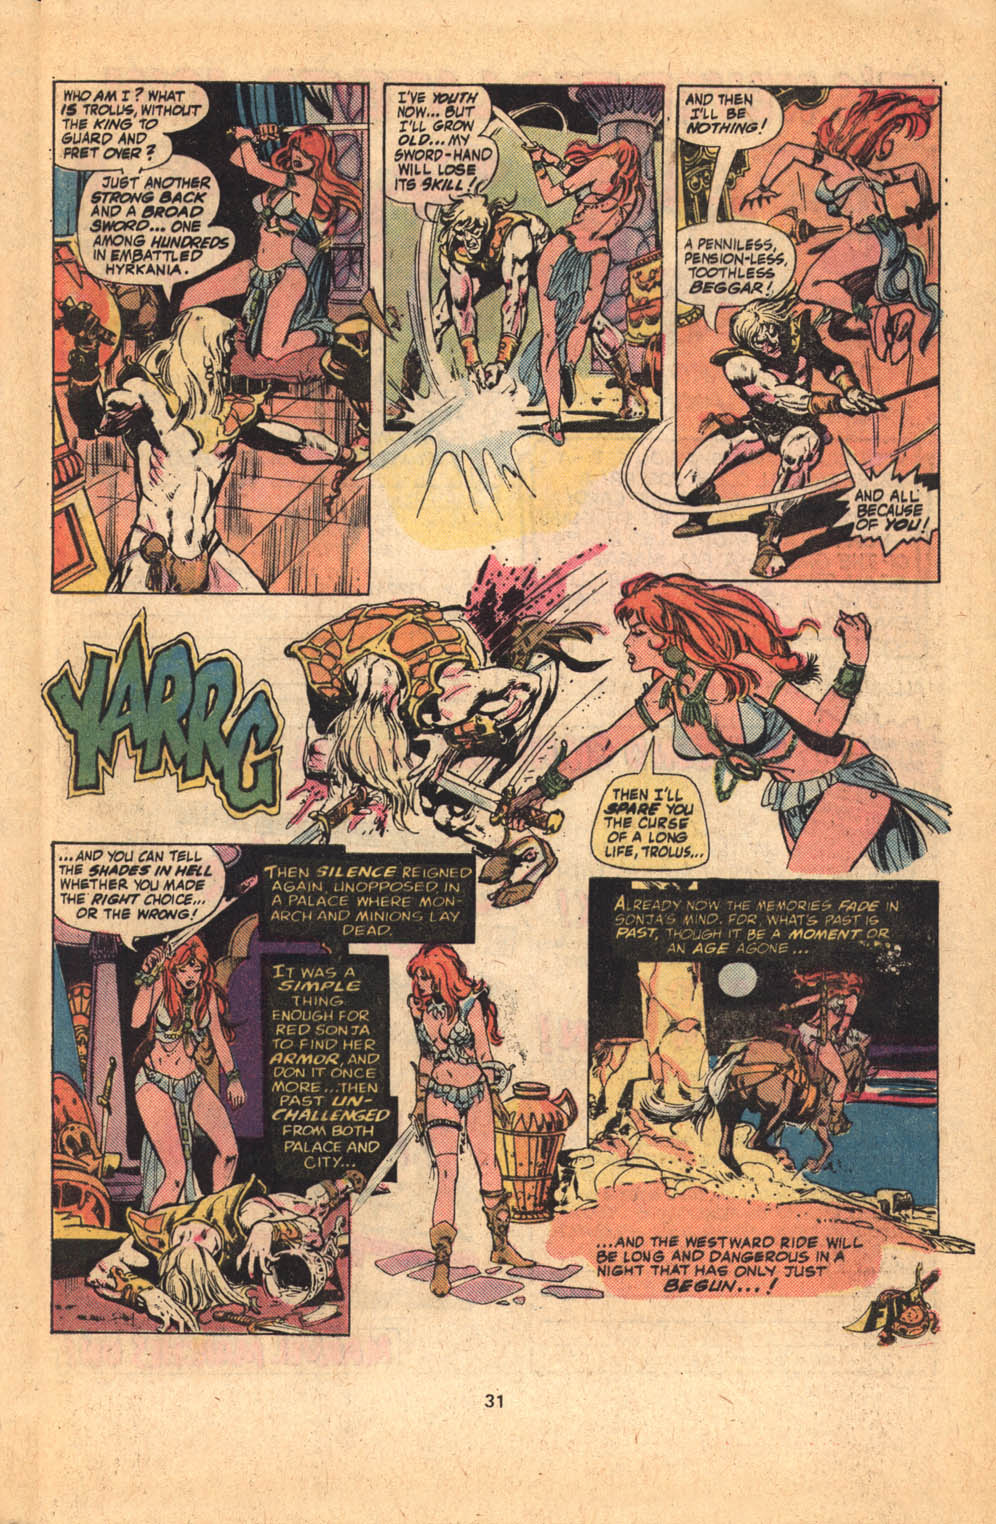 Marvel Feature (1975) 1 Page 20